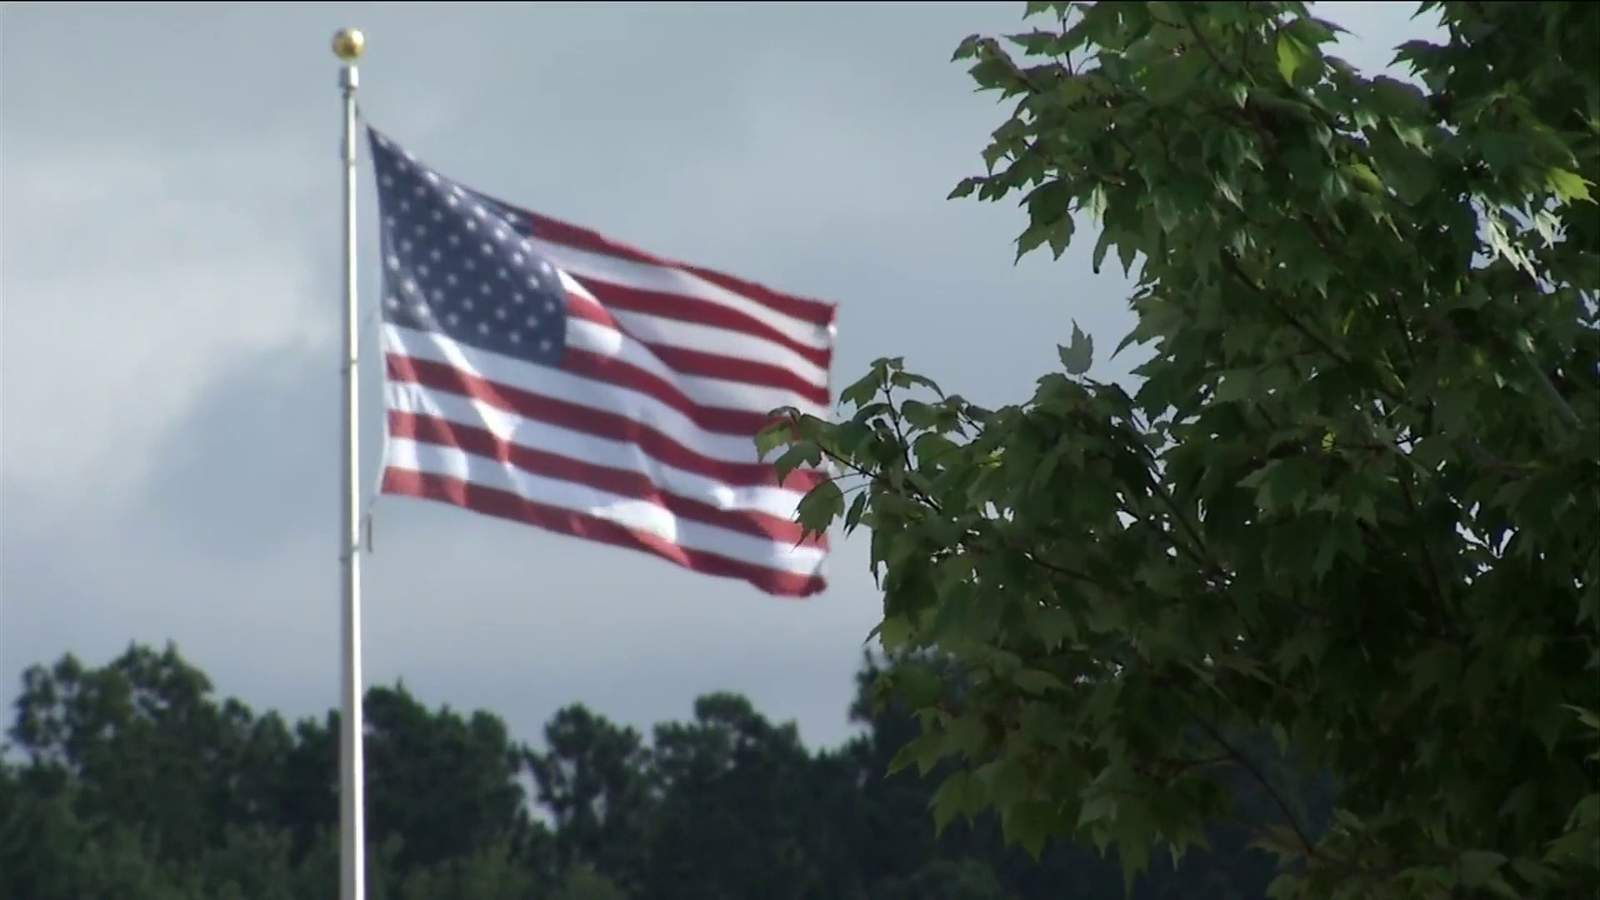 Memorial Day observance at National Cemetery scaled down due to virus